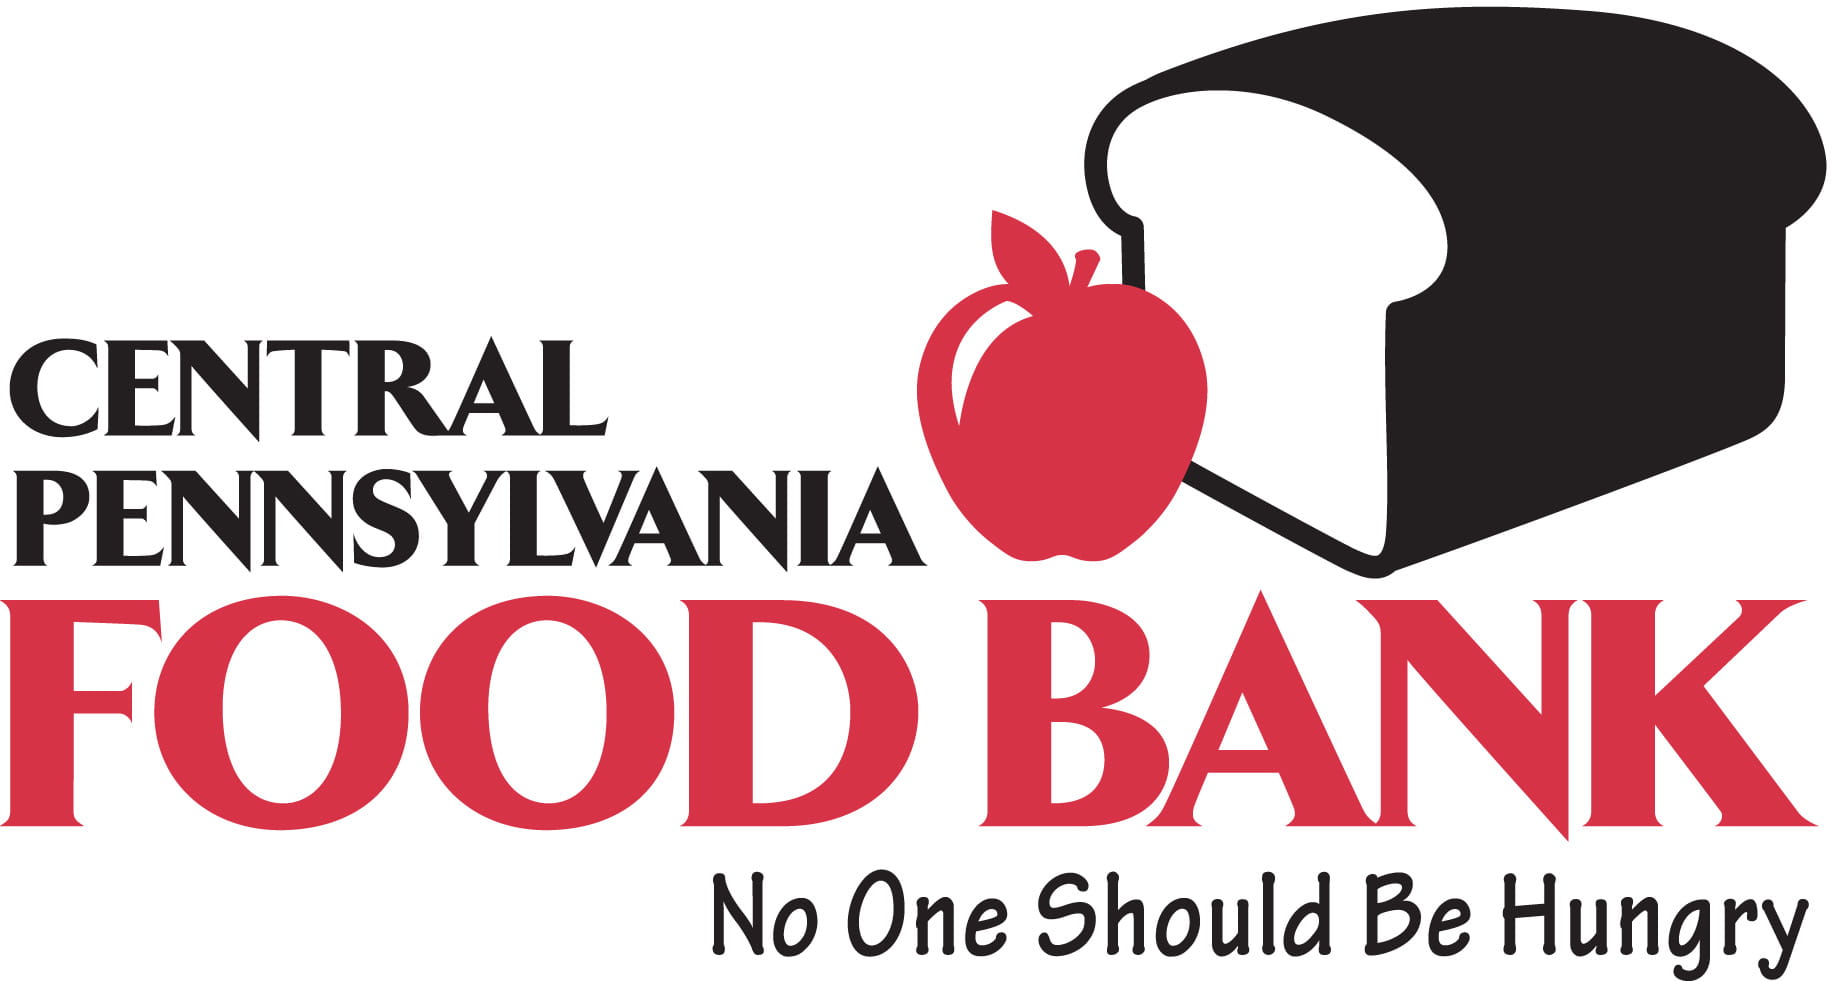 Central Pennsylvania Food Bank: No One Should Be Hungry